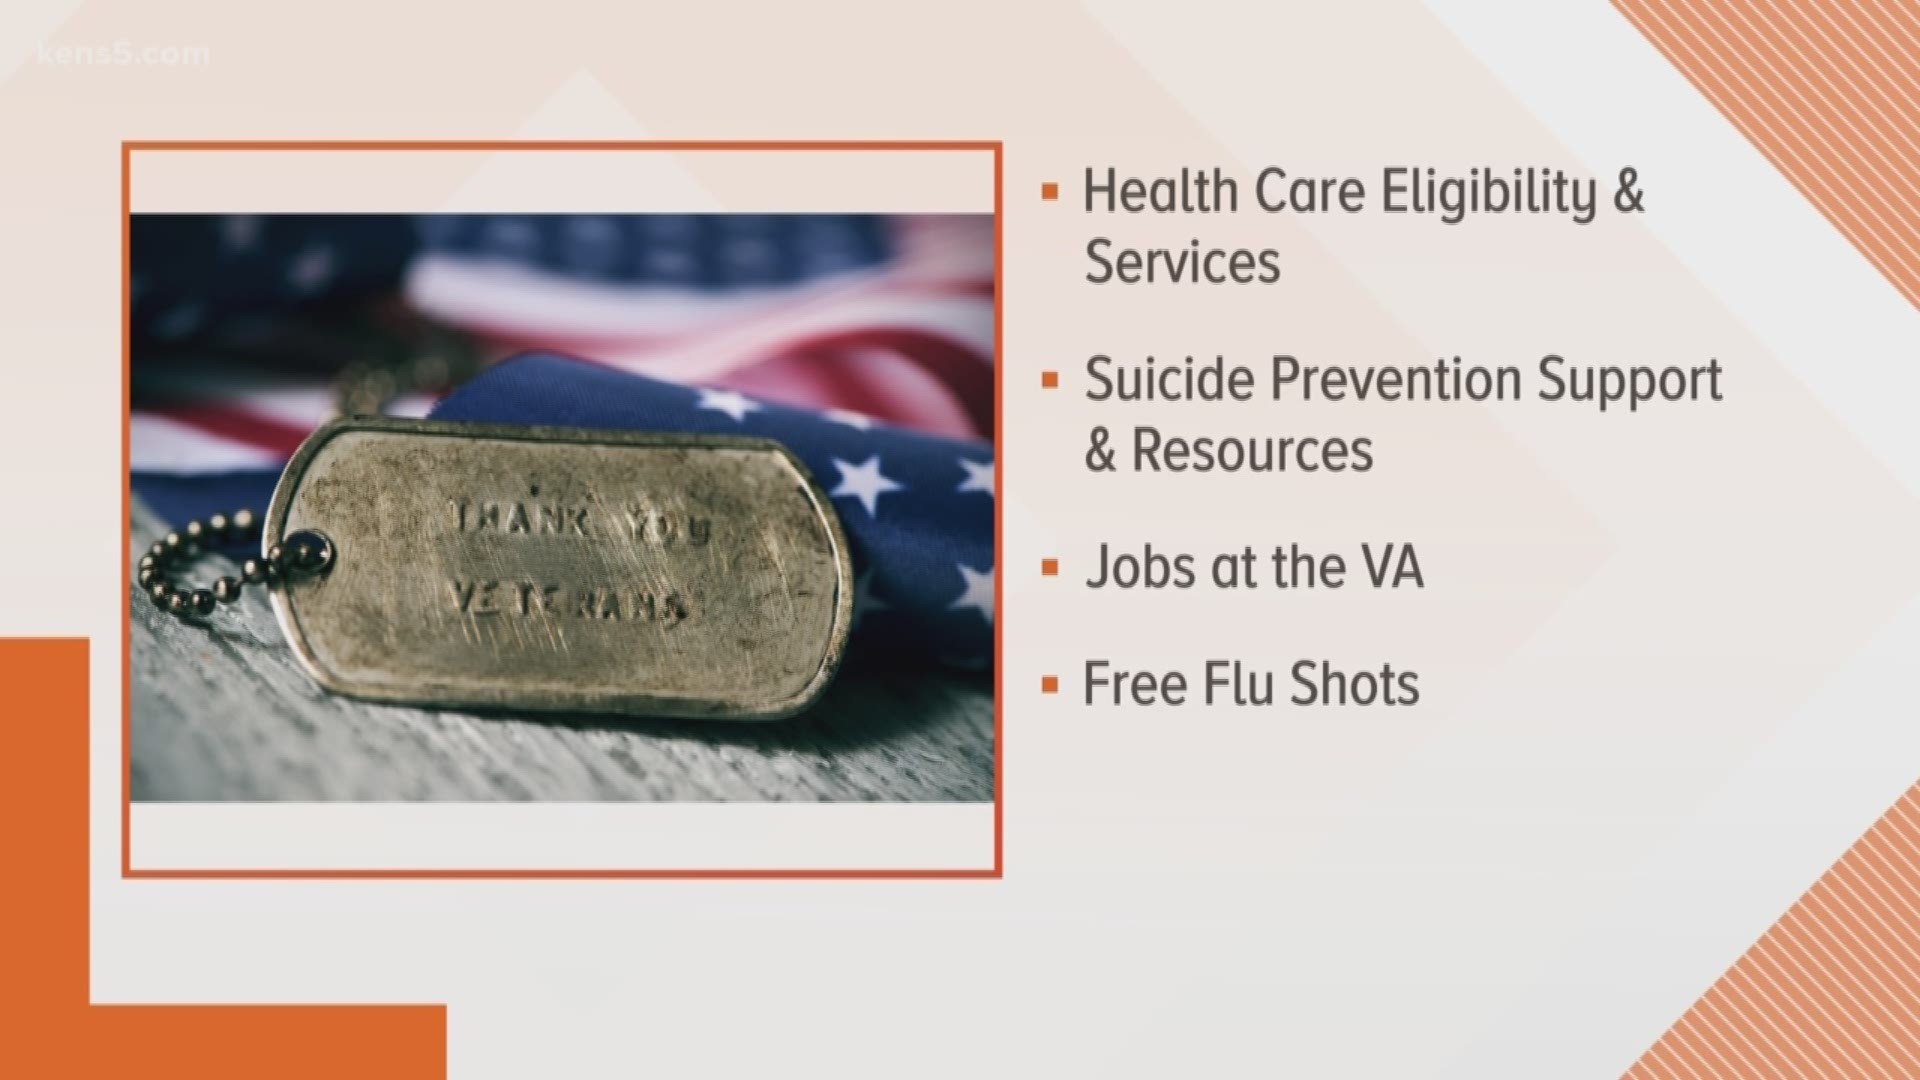 An information fair is being held by the local VA to help veterans and their families.